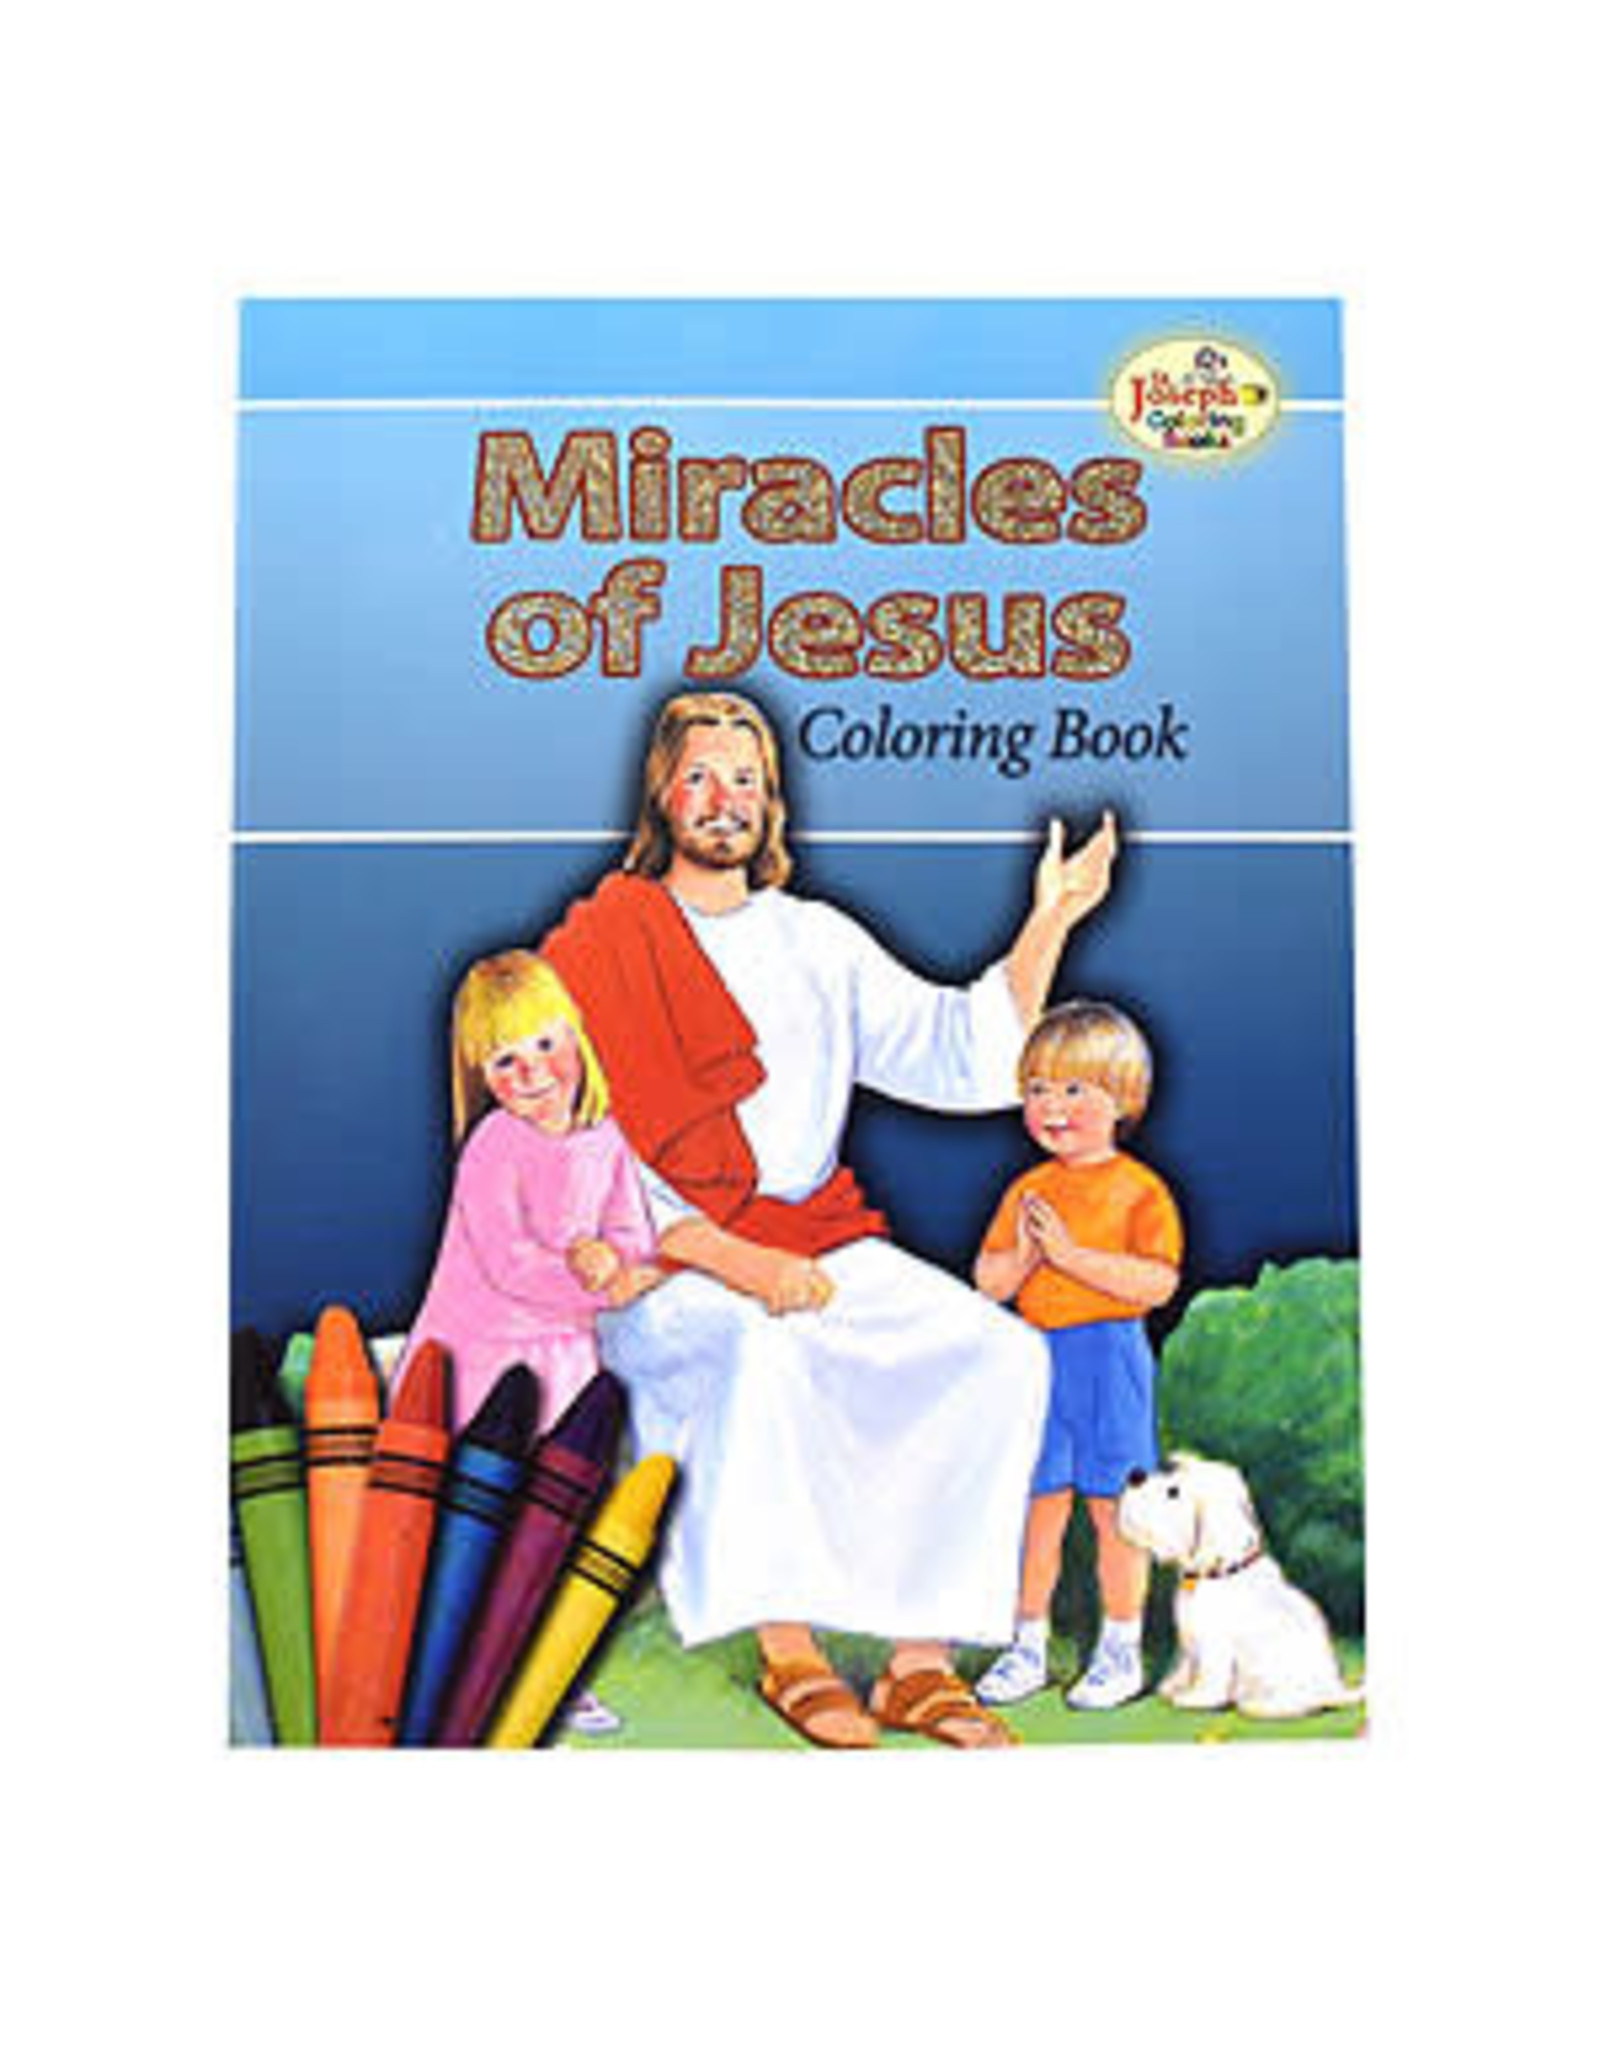 Catholic Book Publishing Coloring Book  - Miracles of Jesus